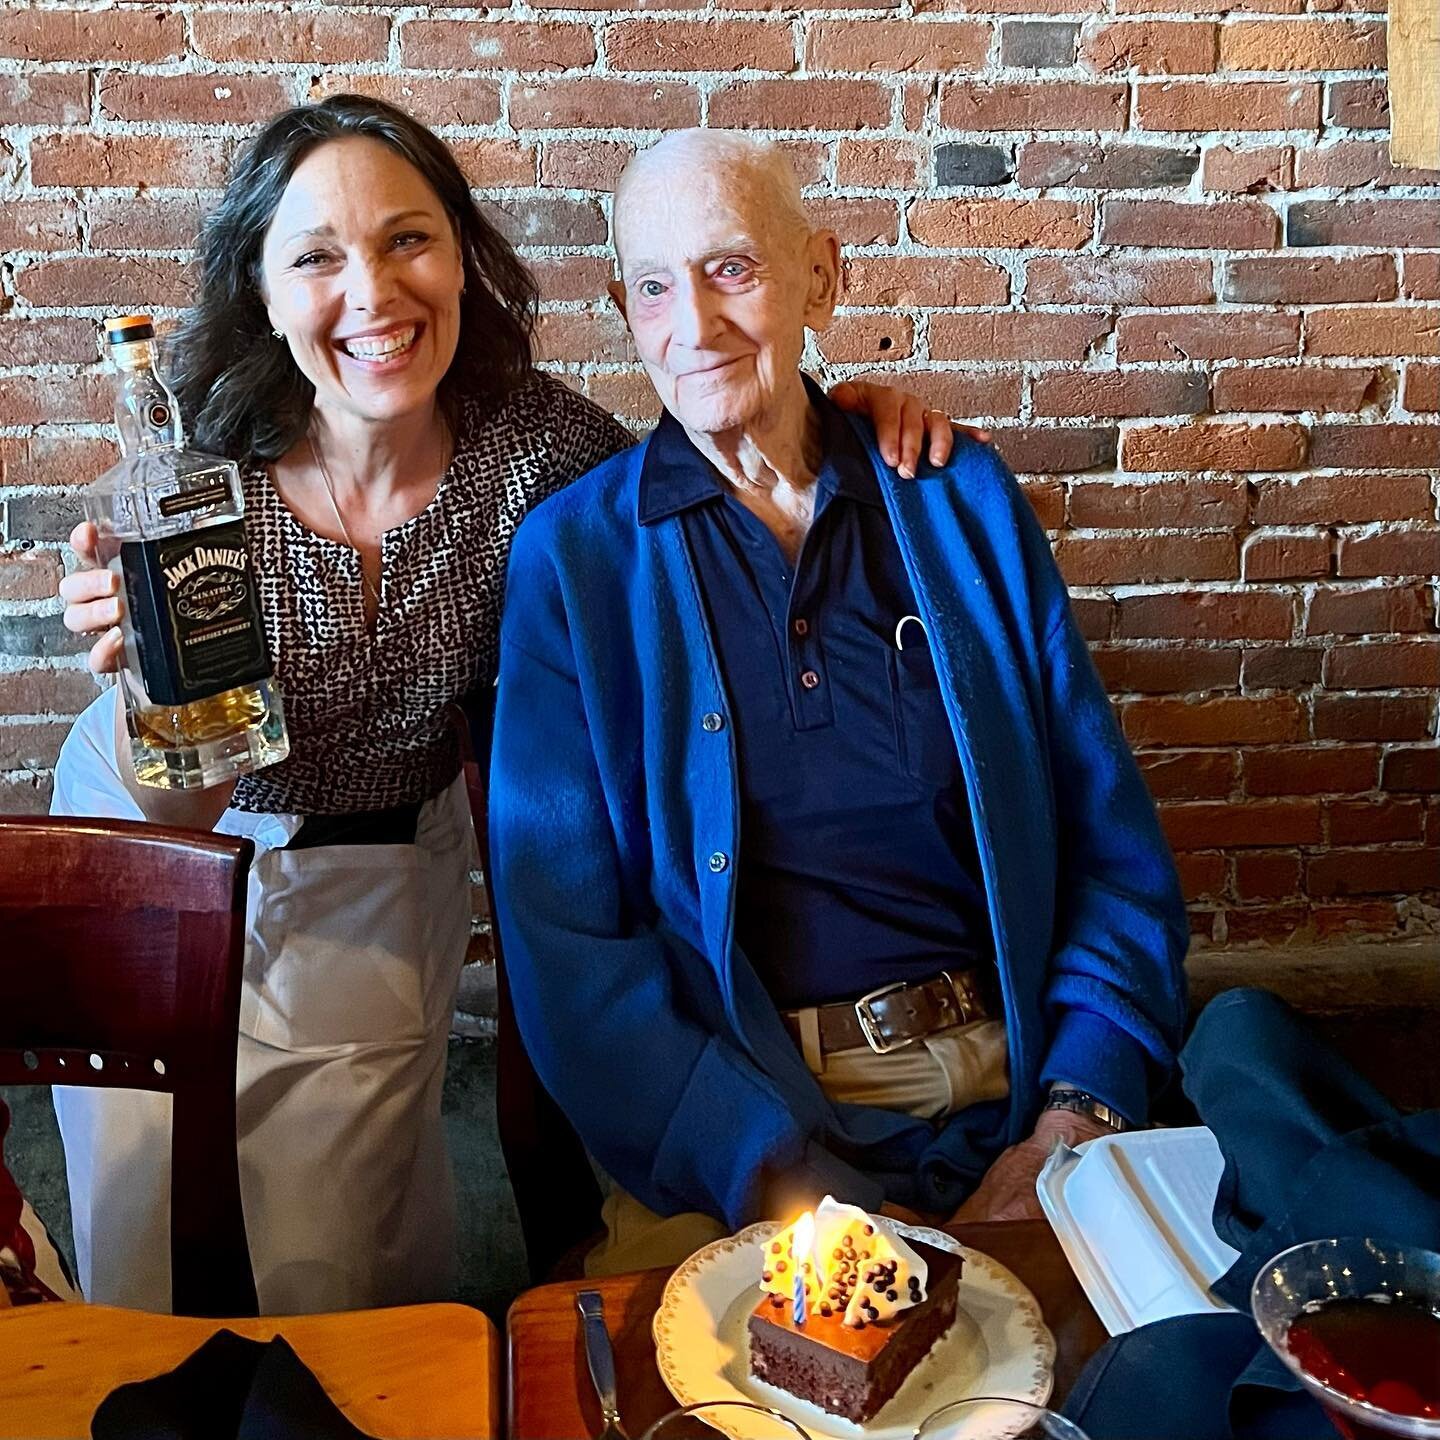 Happy 101st Birthday to Mr. Charles Fagel &mdash; one of our very favorite people, and the inspiration behind the Jack Daniel&rsquo;s Chocolate Cake on our menu this month!

Words can&rsquo;t express how much we enjoyed celebrating this special day w